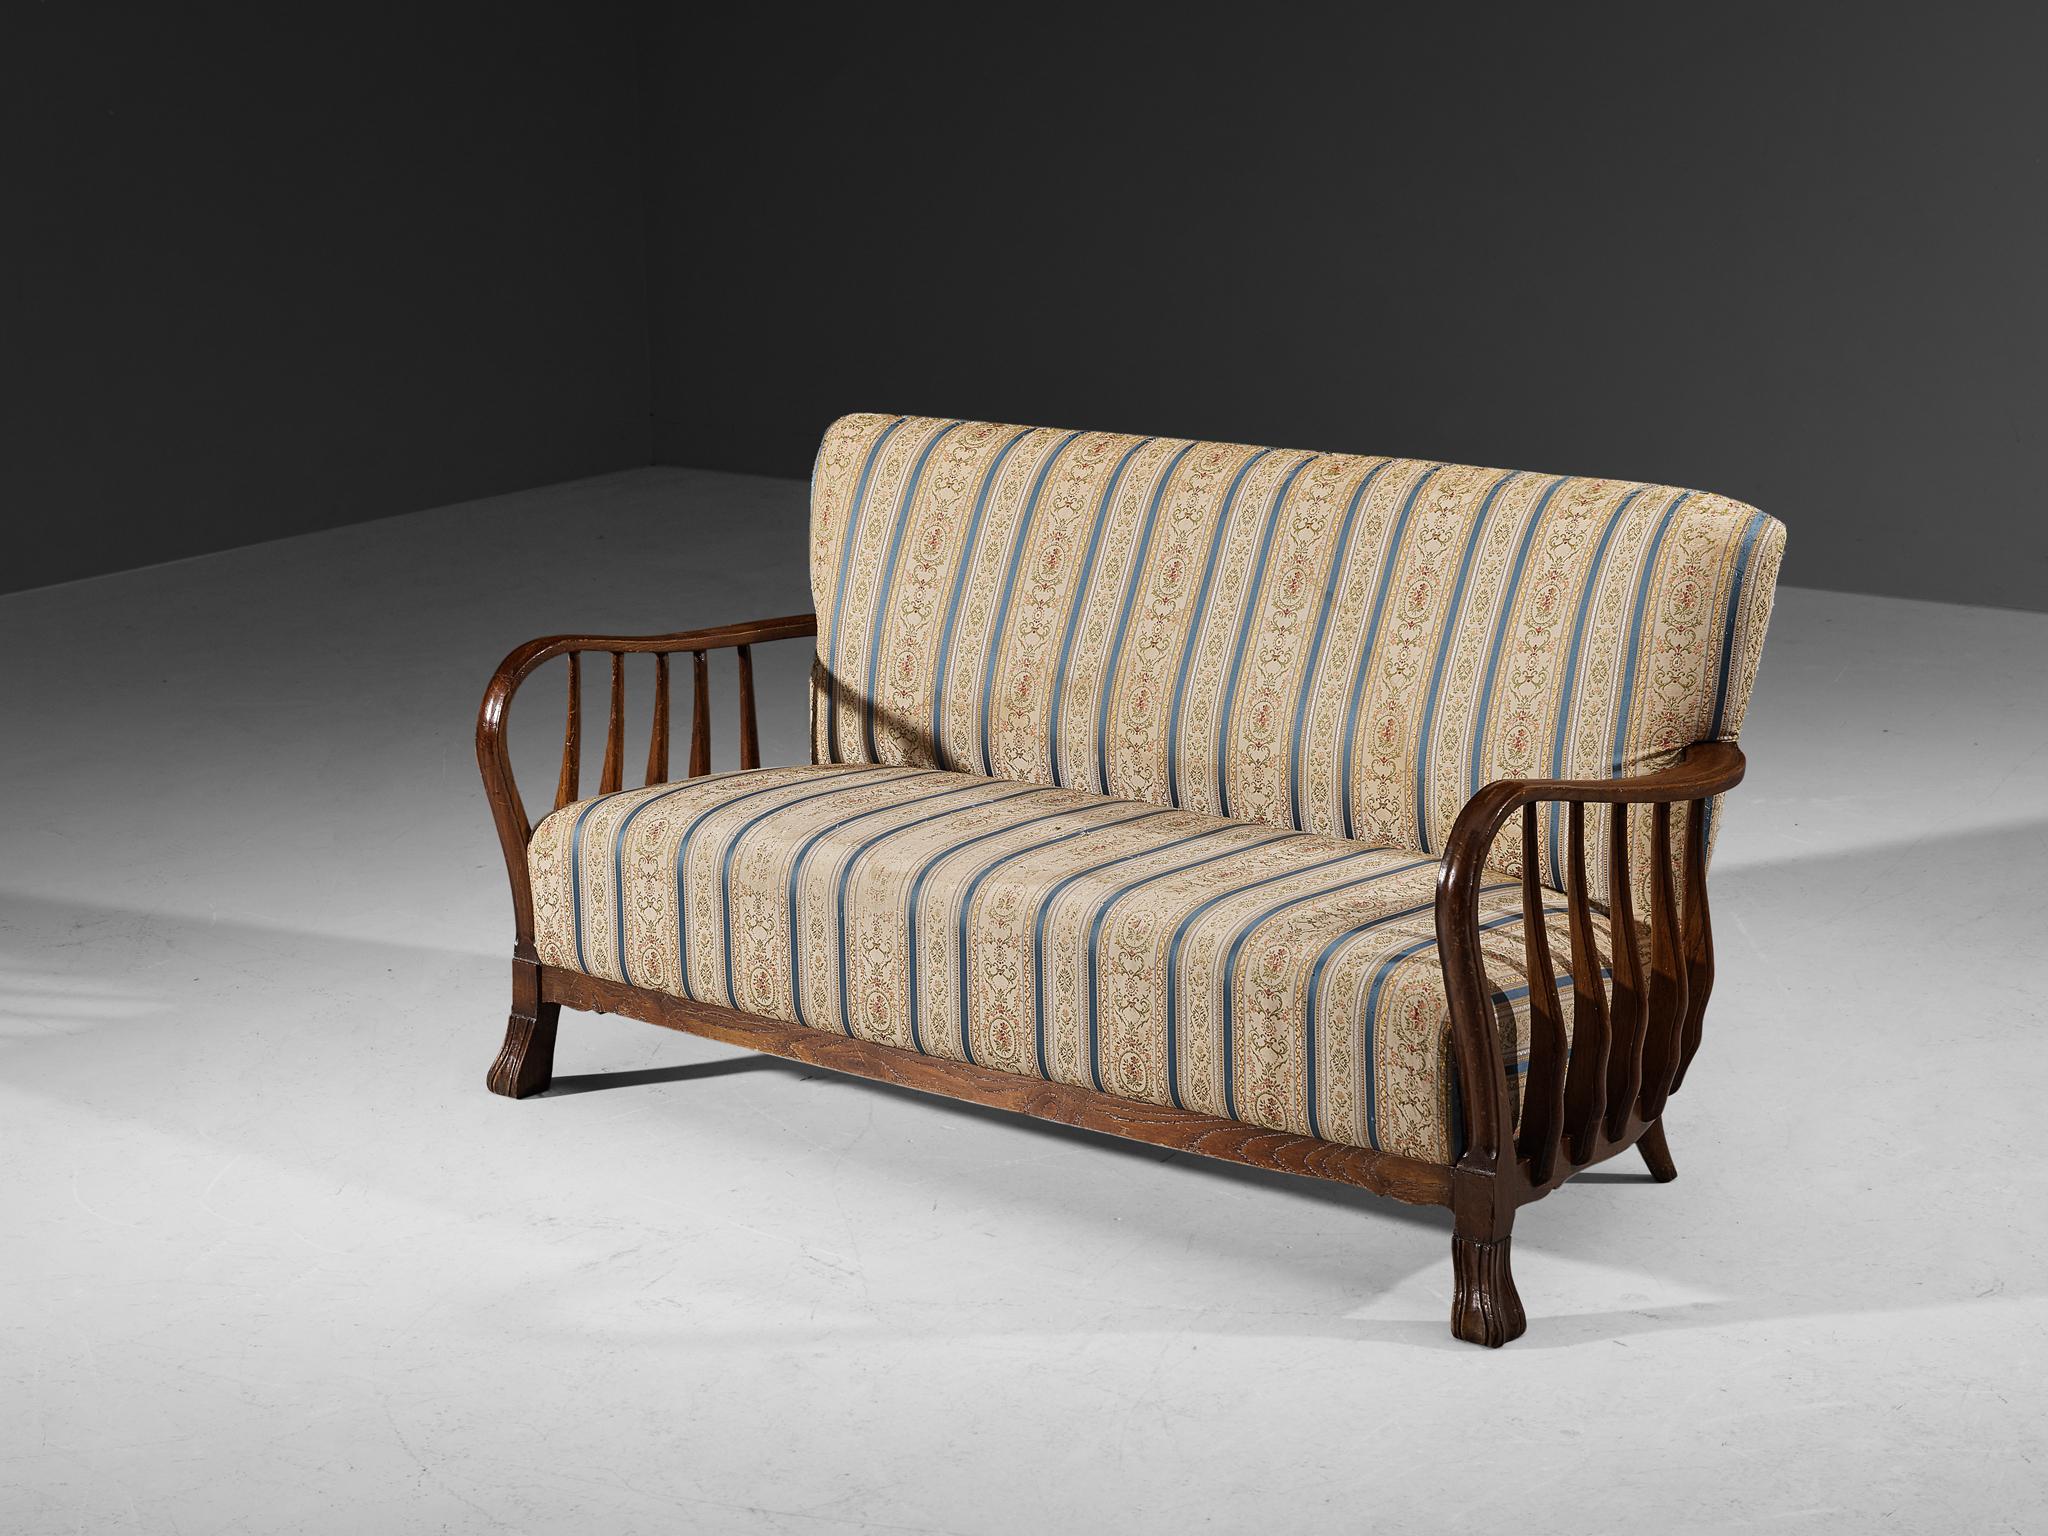 Vittorio Valabrega sofa, maple, fabric, Italy, 1920s.

Elegant and beautiful two seat sofa with a maple frame, and a vertical striped fabric in green and beige motive. This settee is designed by the Italian Vittorio Valabrega in the 1920s. This